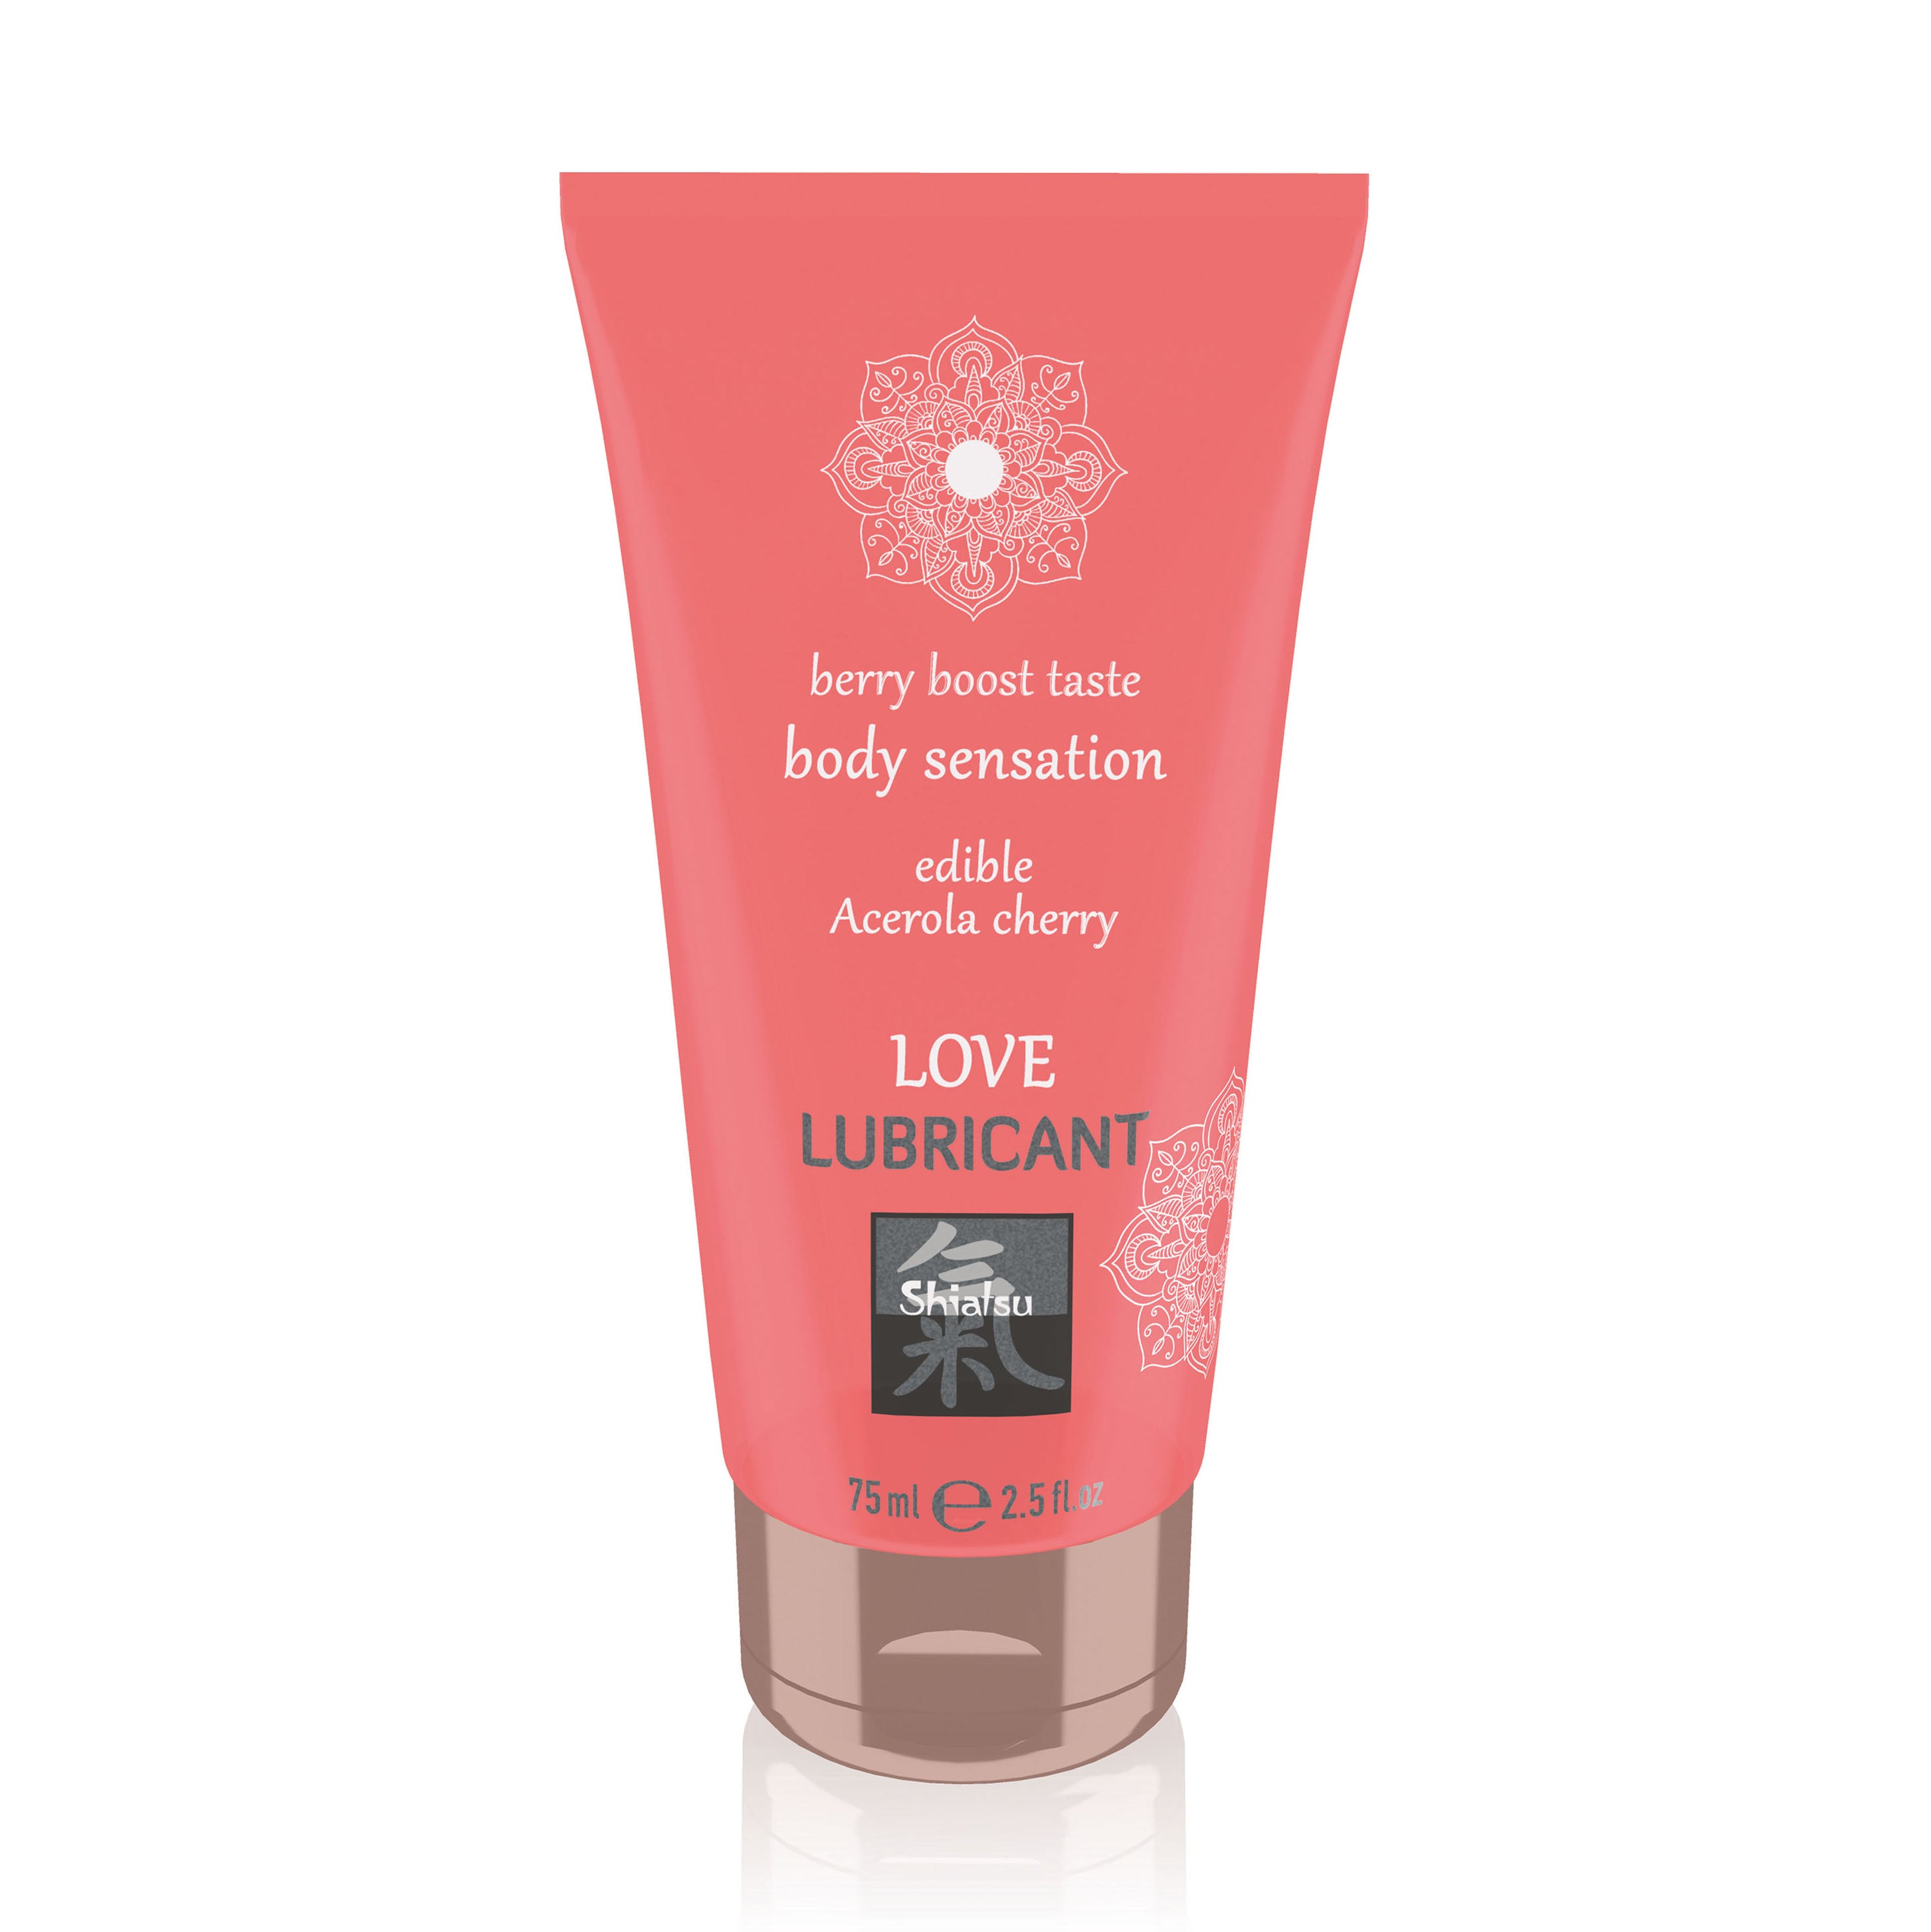 Shiatsu Love Lubricant Edible Acerola Cherry 75ml > Relaxation Zone > Flavoured Lubricants and Oils 75ml, Both, Flavoured Lubricants and Oils, NEWLY-IMPORTED - So Luxe Lingerie